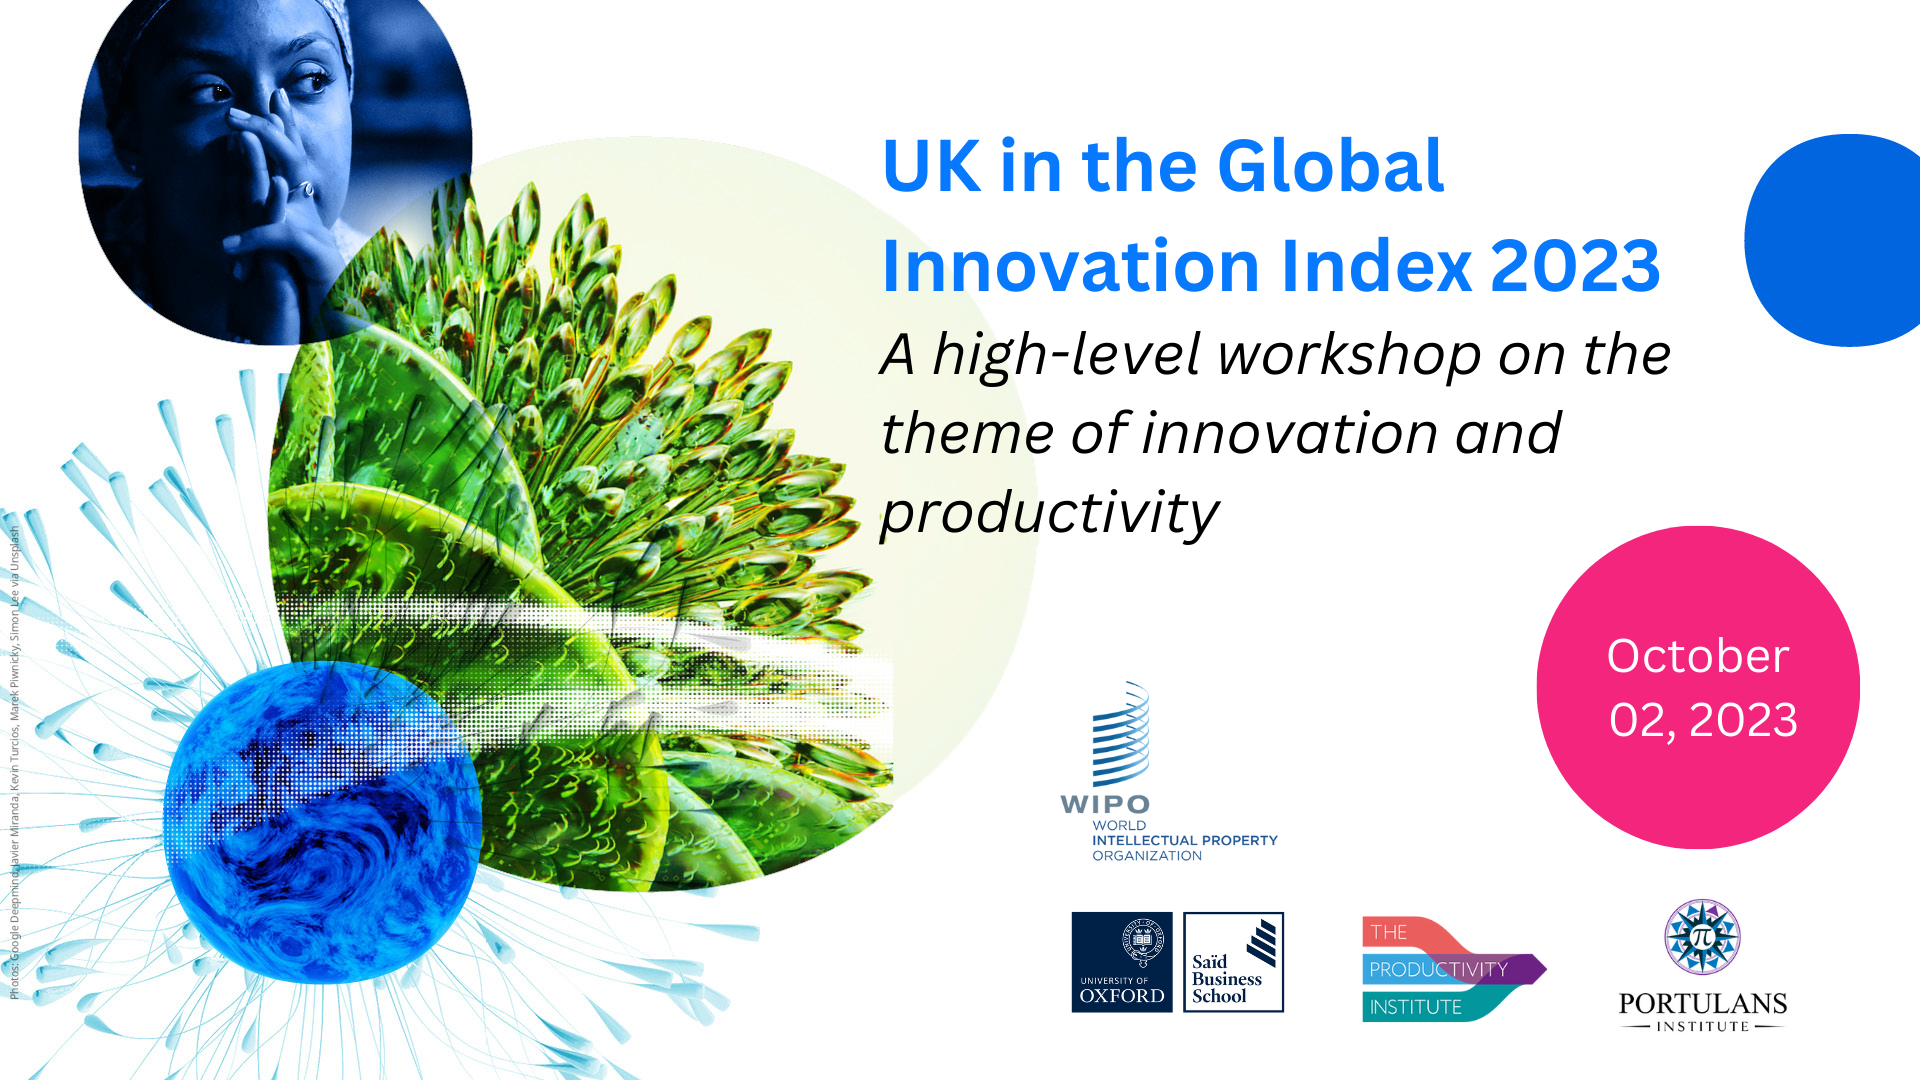 UK Launch of the Global Innovation Index 2023